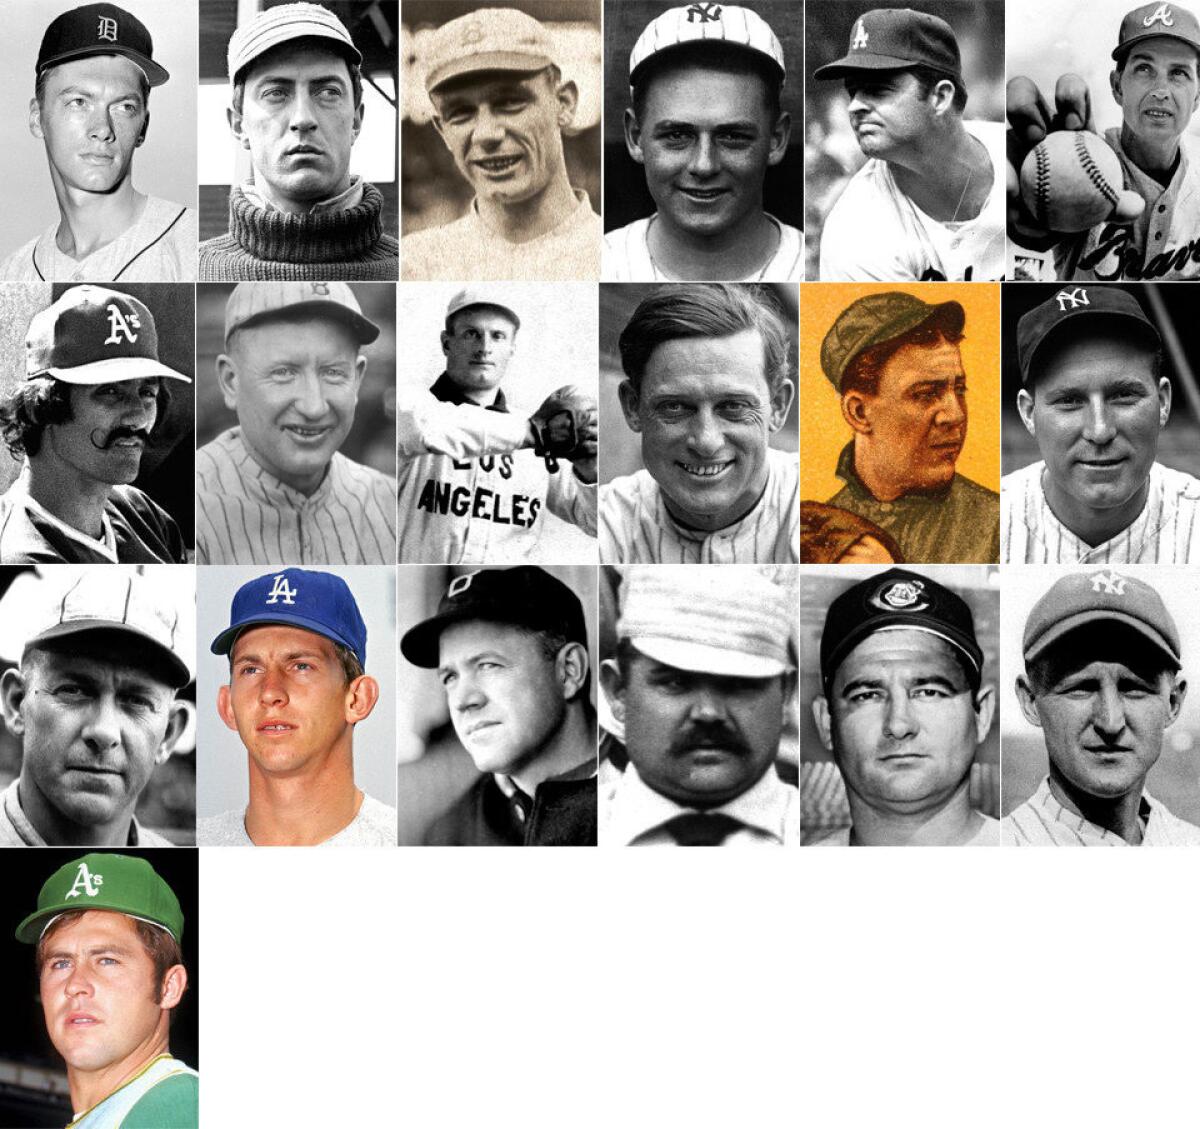 Left to right (top): Jim Bunning, Vic Willis, Rube Marquard, Waite Hoyt, Don Drysdale, Hoyt Wilhelm. Second row: Rollie Fingers, Dazzy Vance, Rube Waddell, Ed Walsh, Addie Joss, Red Ruffing.